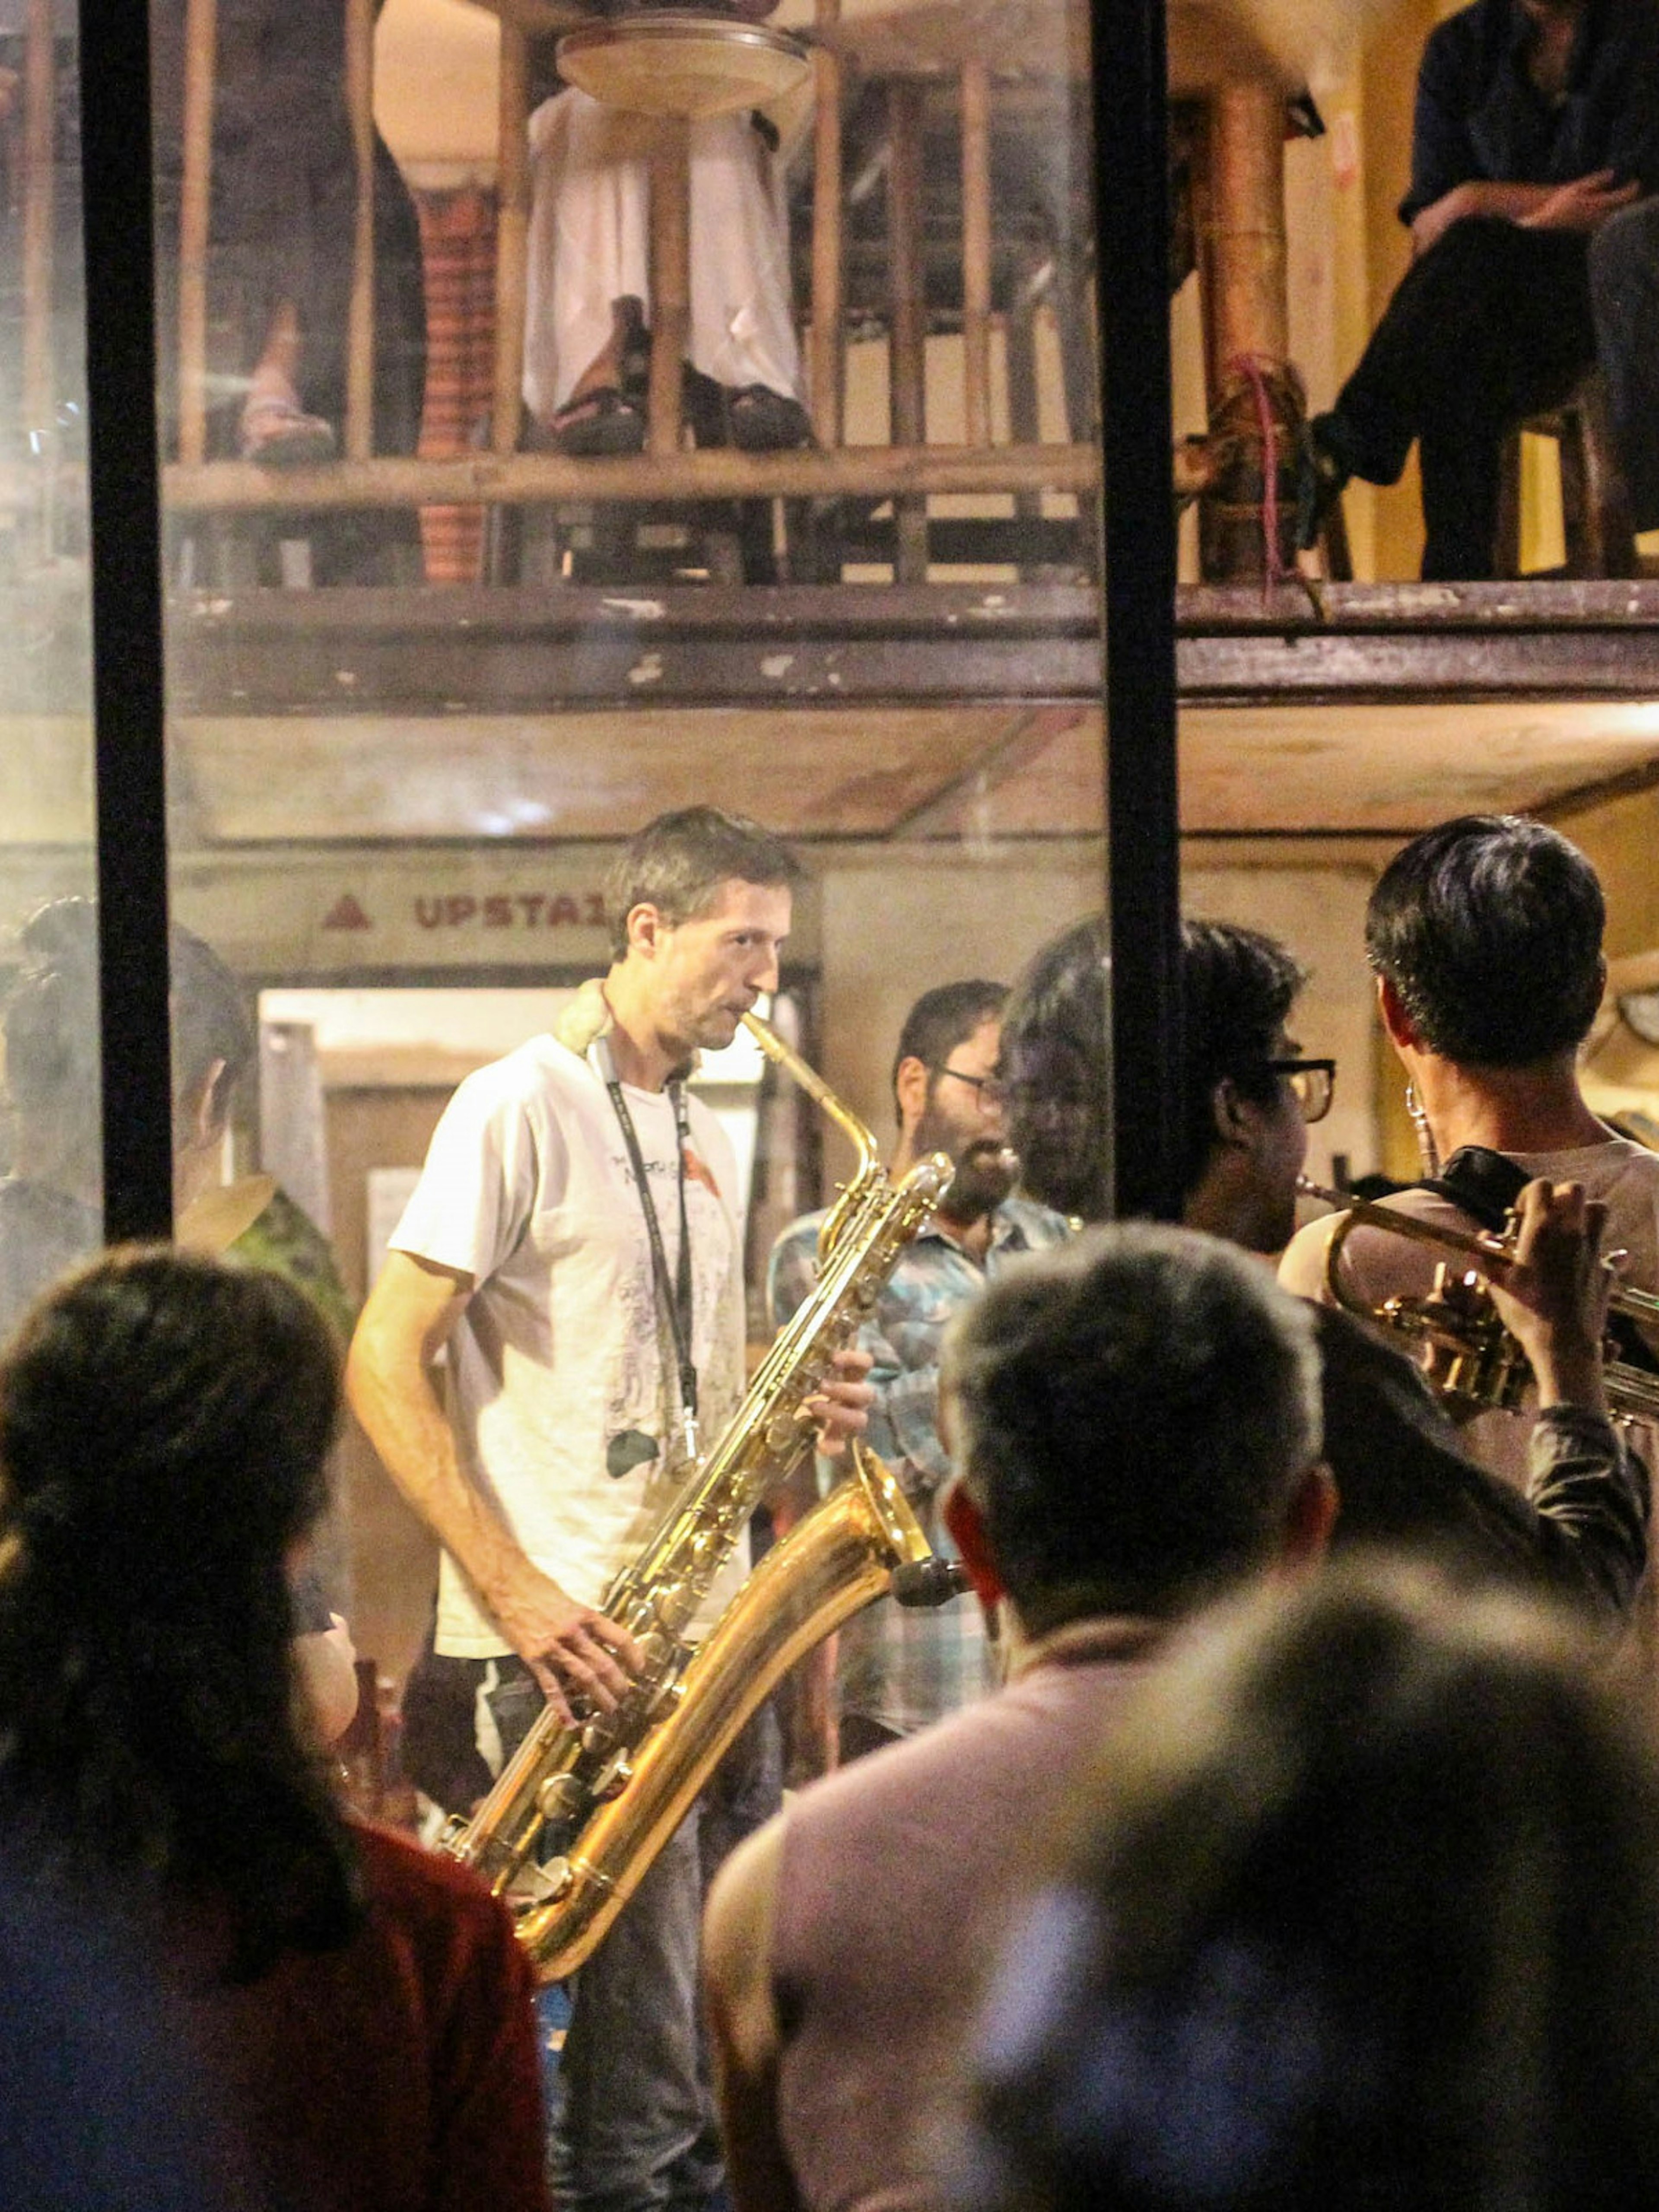 Head to North Gate Jazz Co-Op for live music every night © Alana Morgan / Lonely Planet